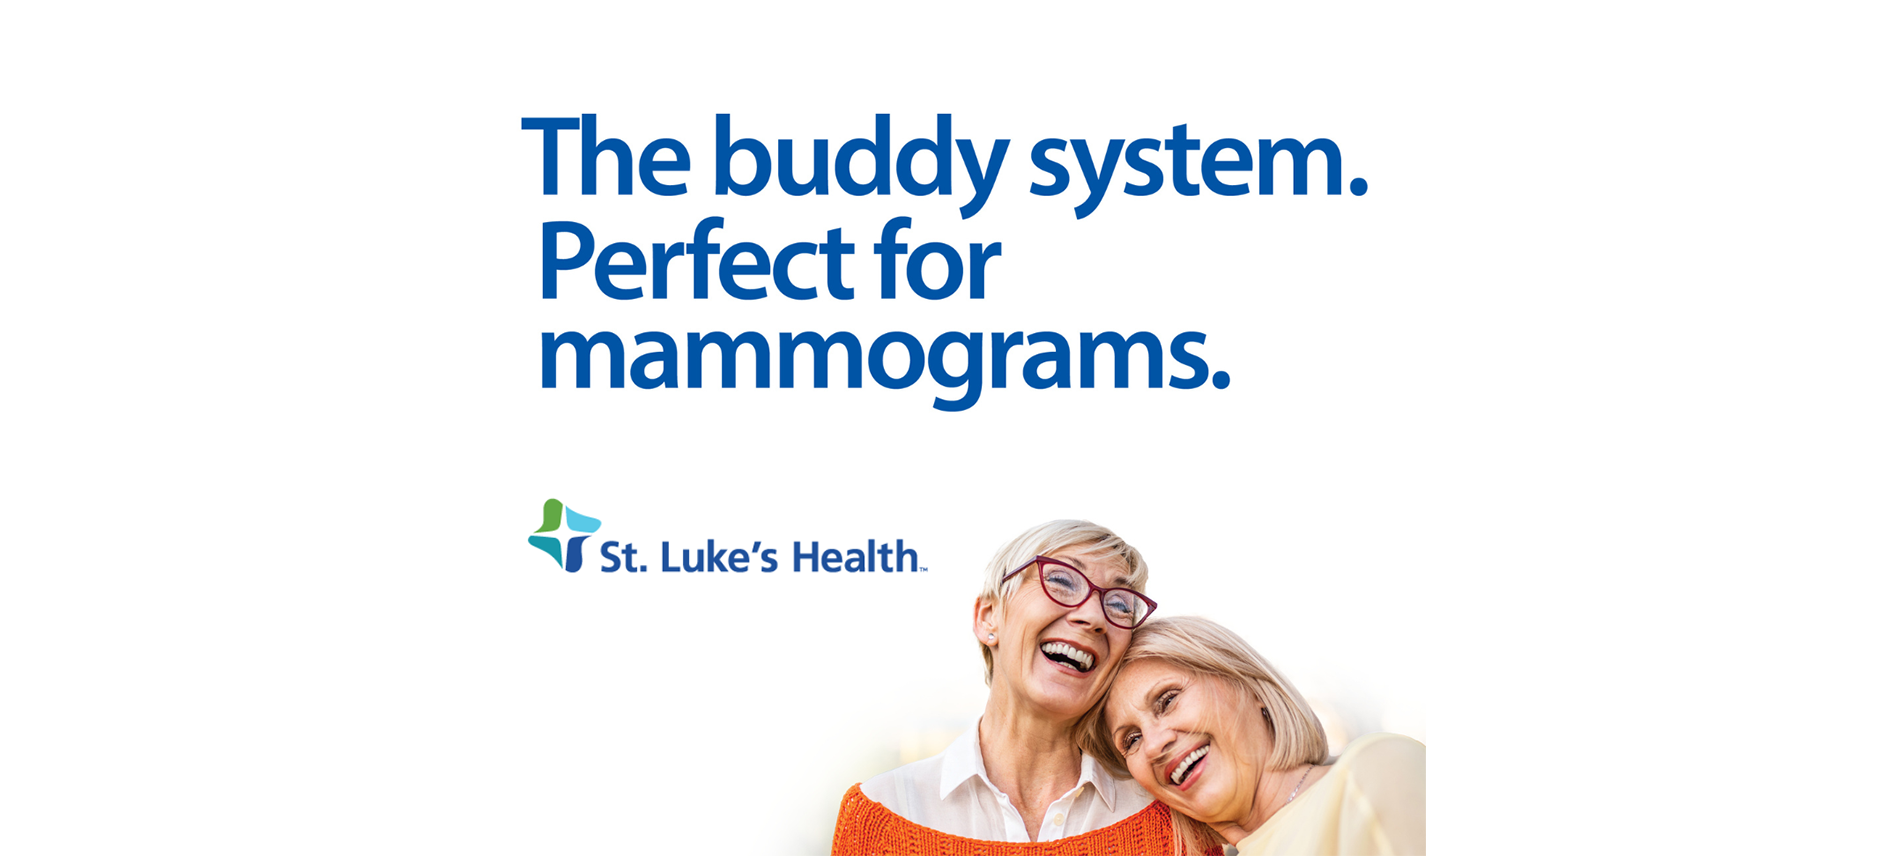 Text: The buddy system. Perfect for mammograms.